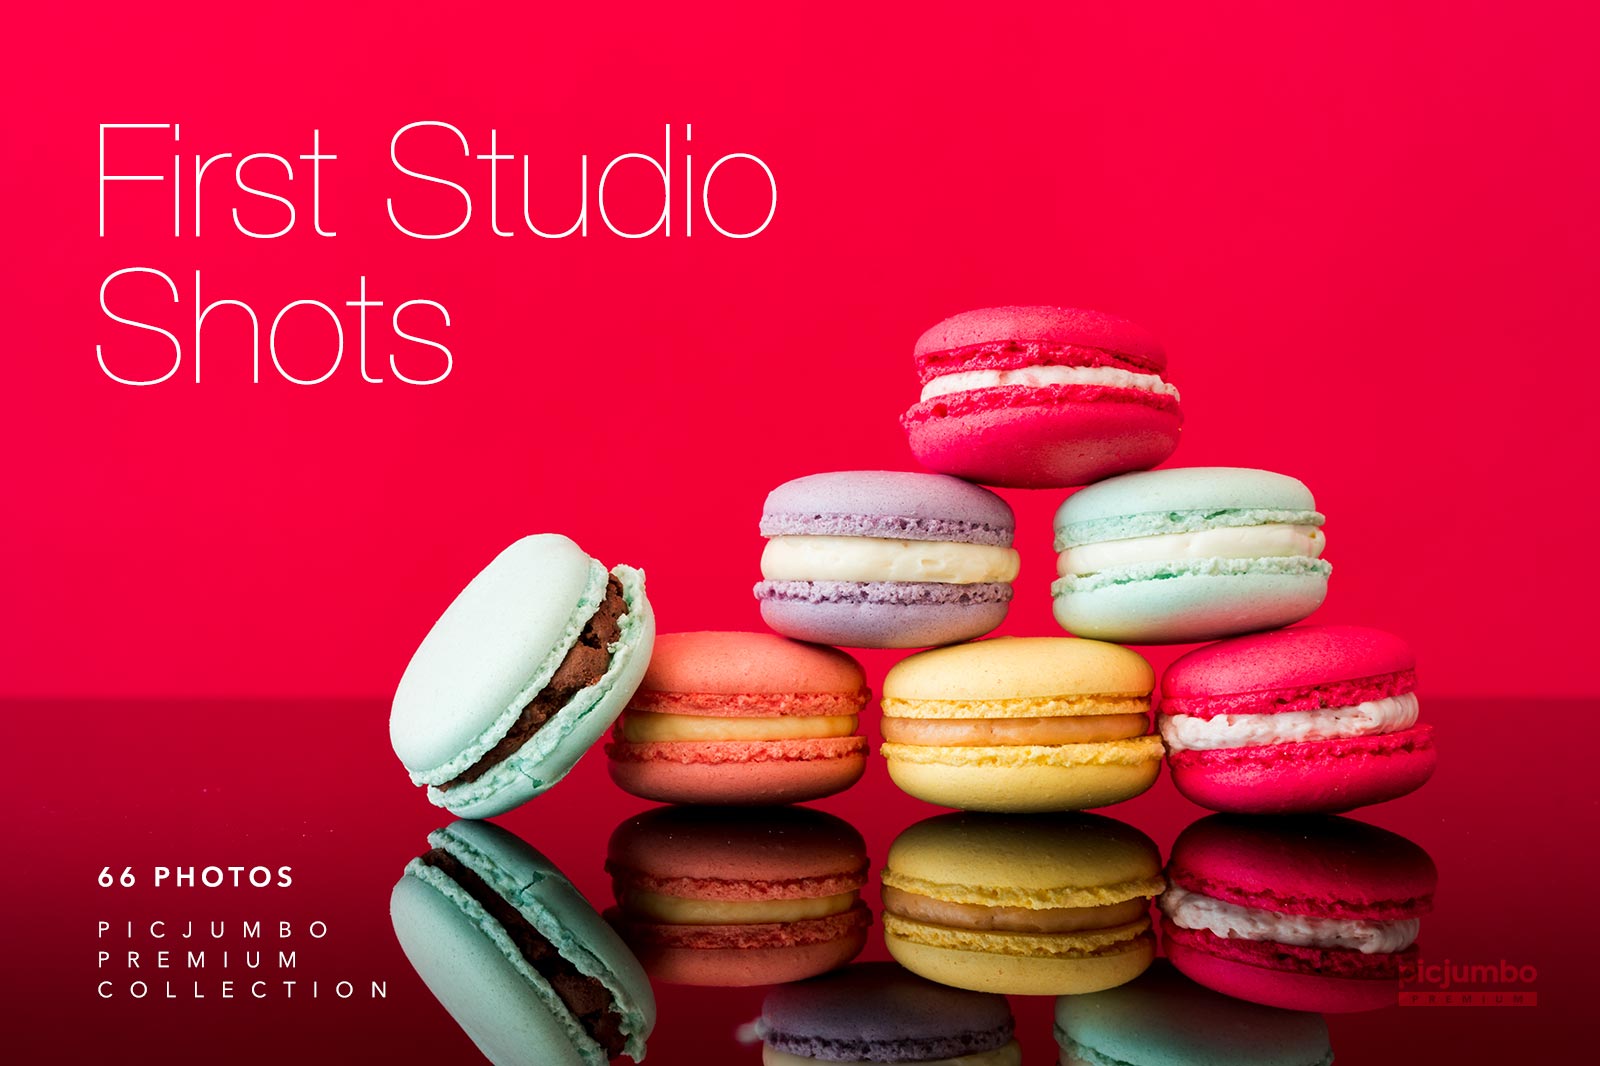 Download hi-res stock photos from our First Studio Shots PREMIUM Collection!